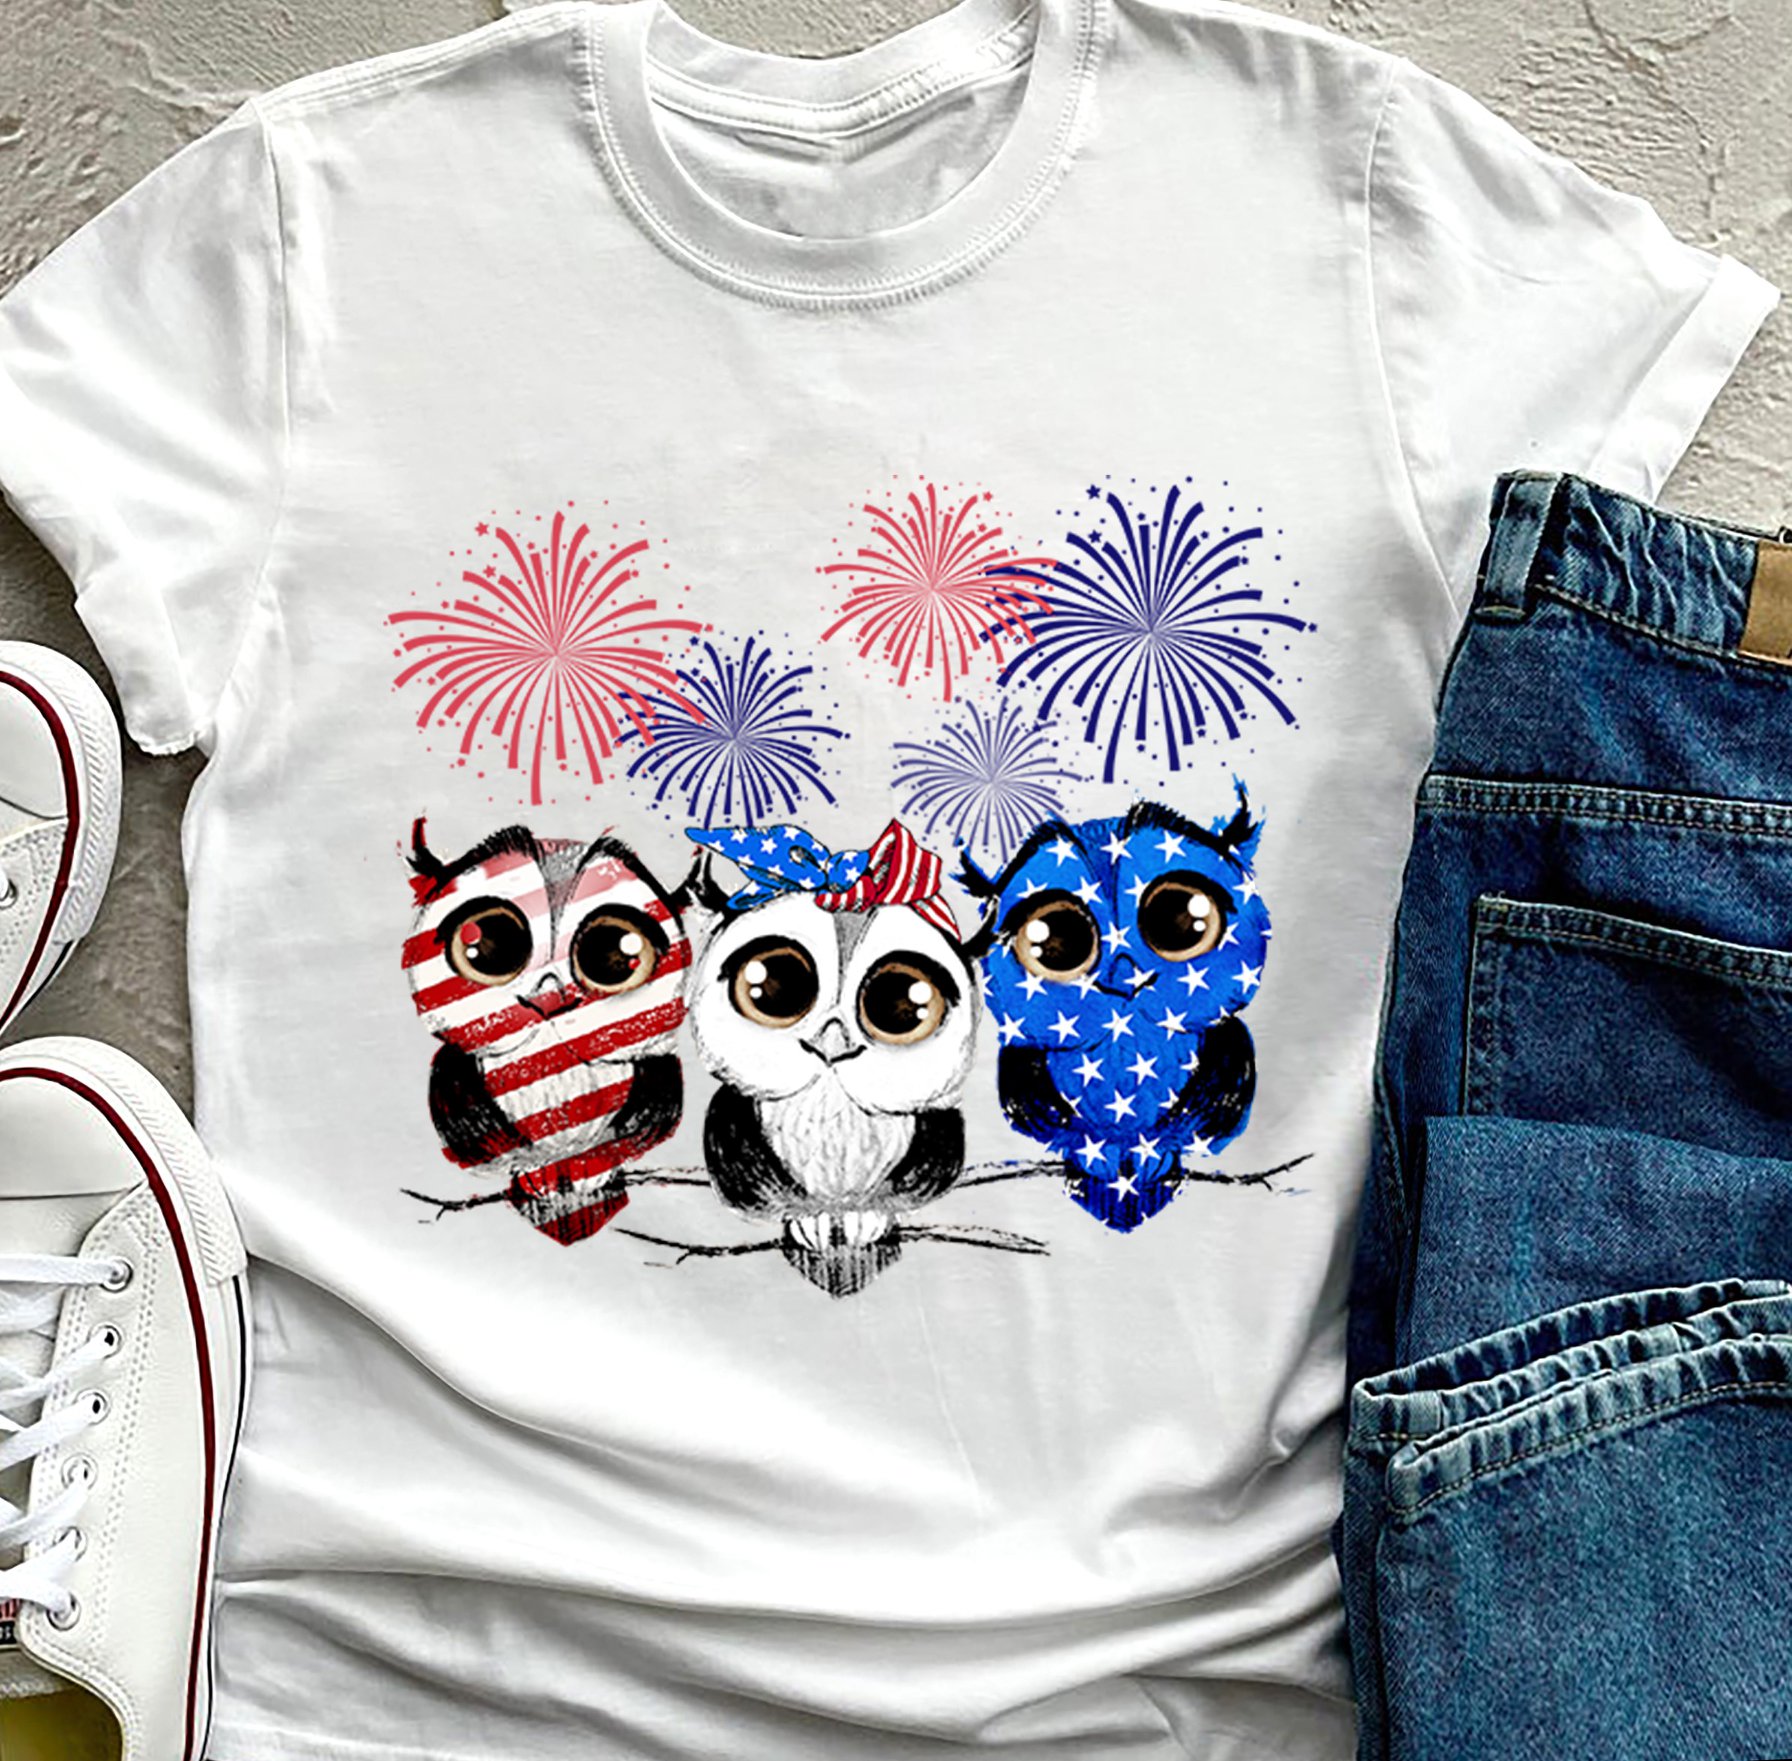 America flag and owl - Owl lover